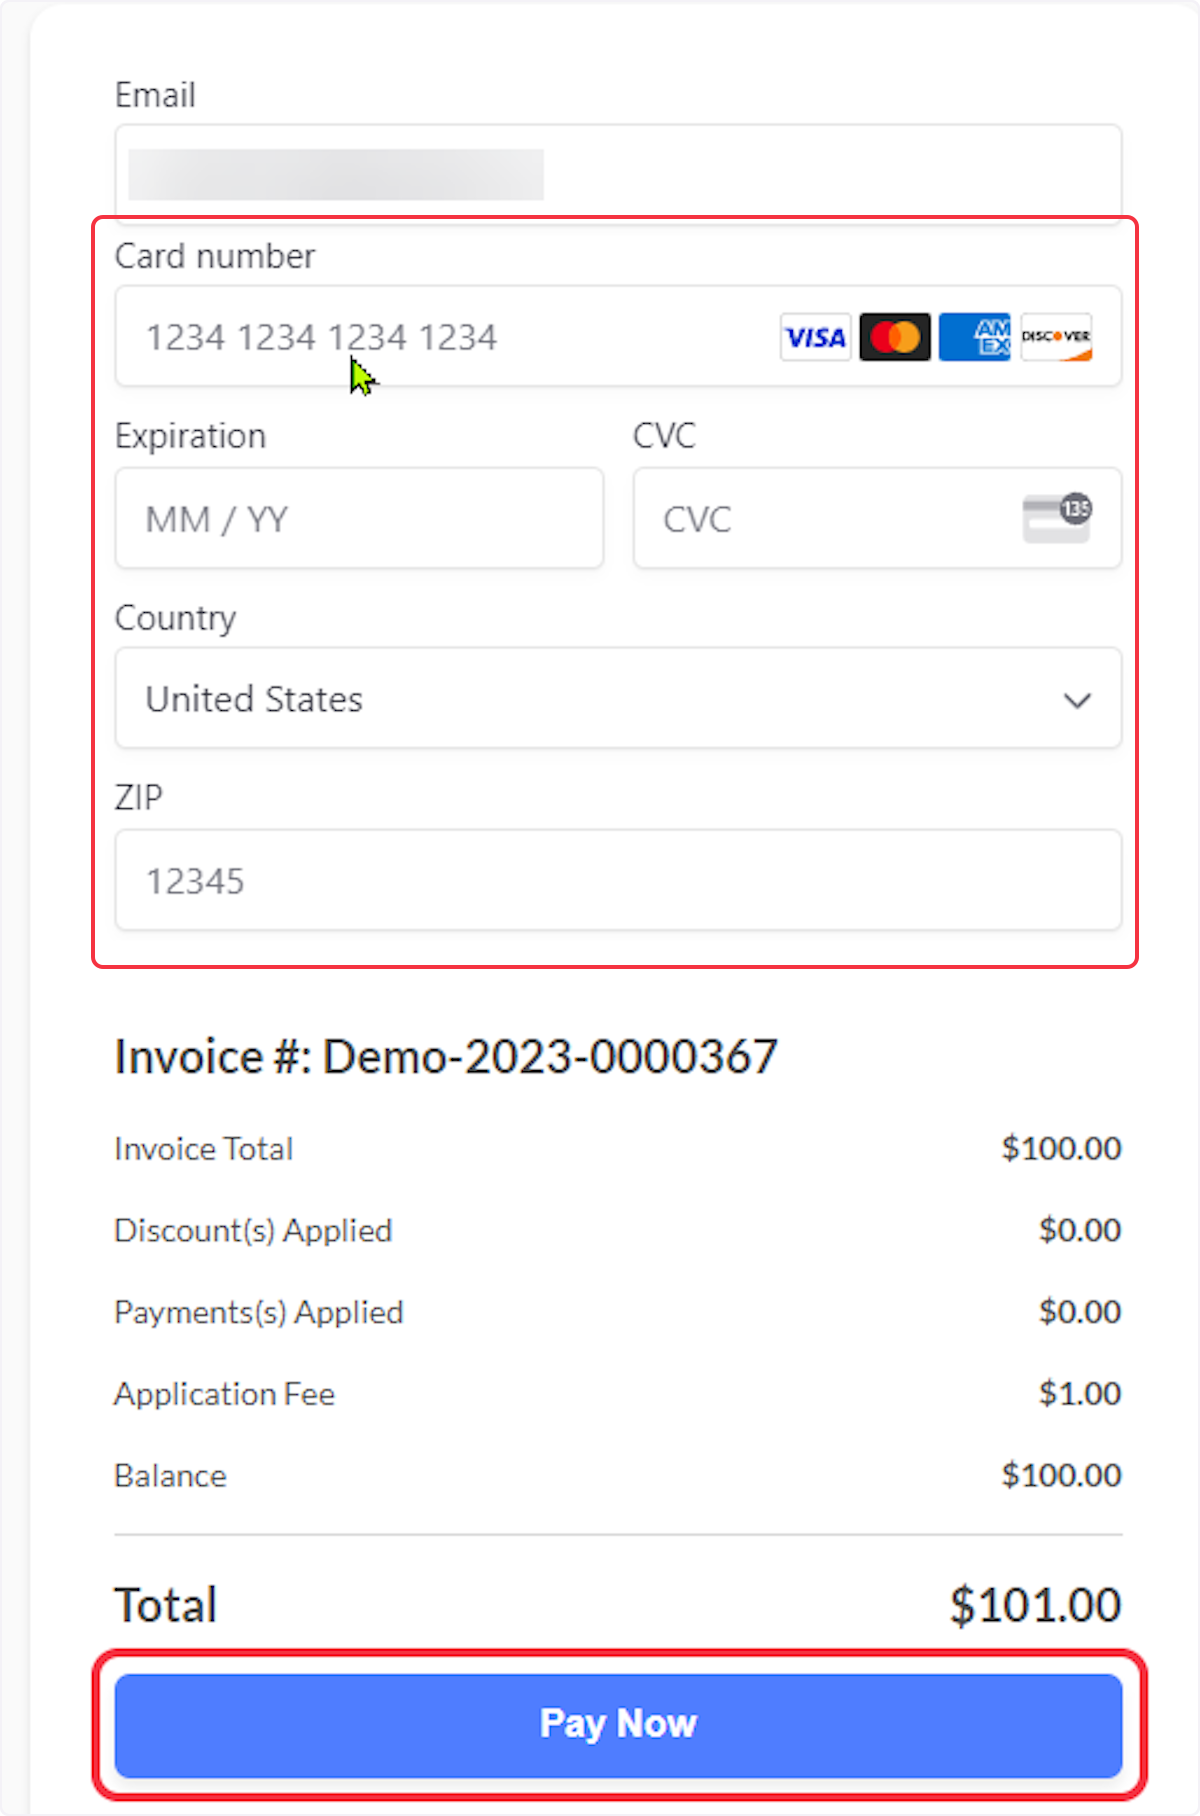 The Invoice Contact will enter payment details and click on Pay Now.